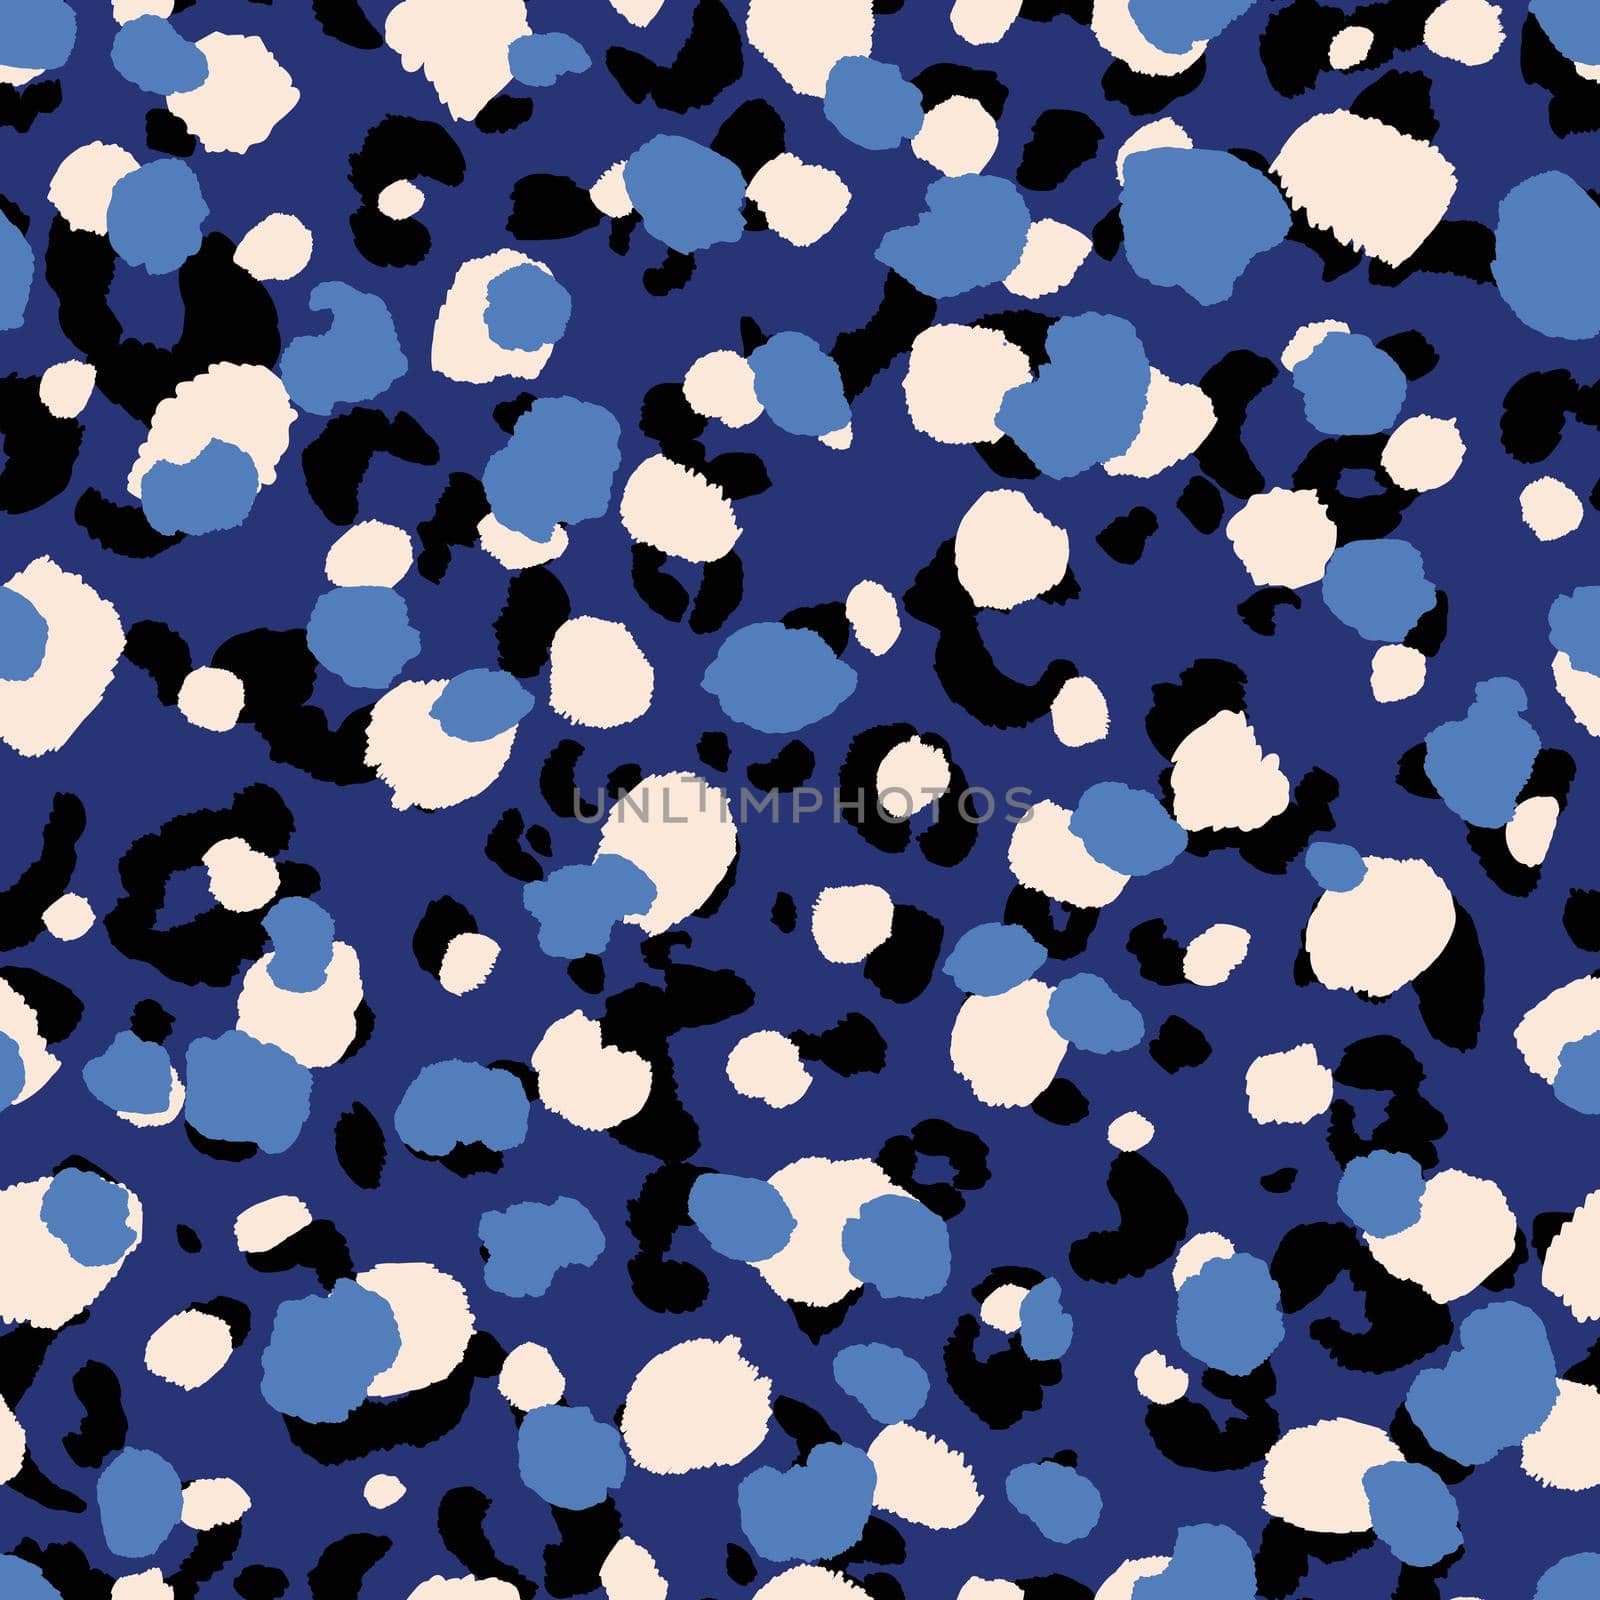 Abstract modern leopard seamless pattern. Animals trendy background. Blue and black decorative vector stock illustration for print, card, postcard, fabric, textile. Modern ornament of stylized skin. by allaku